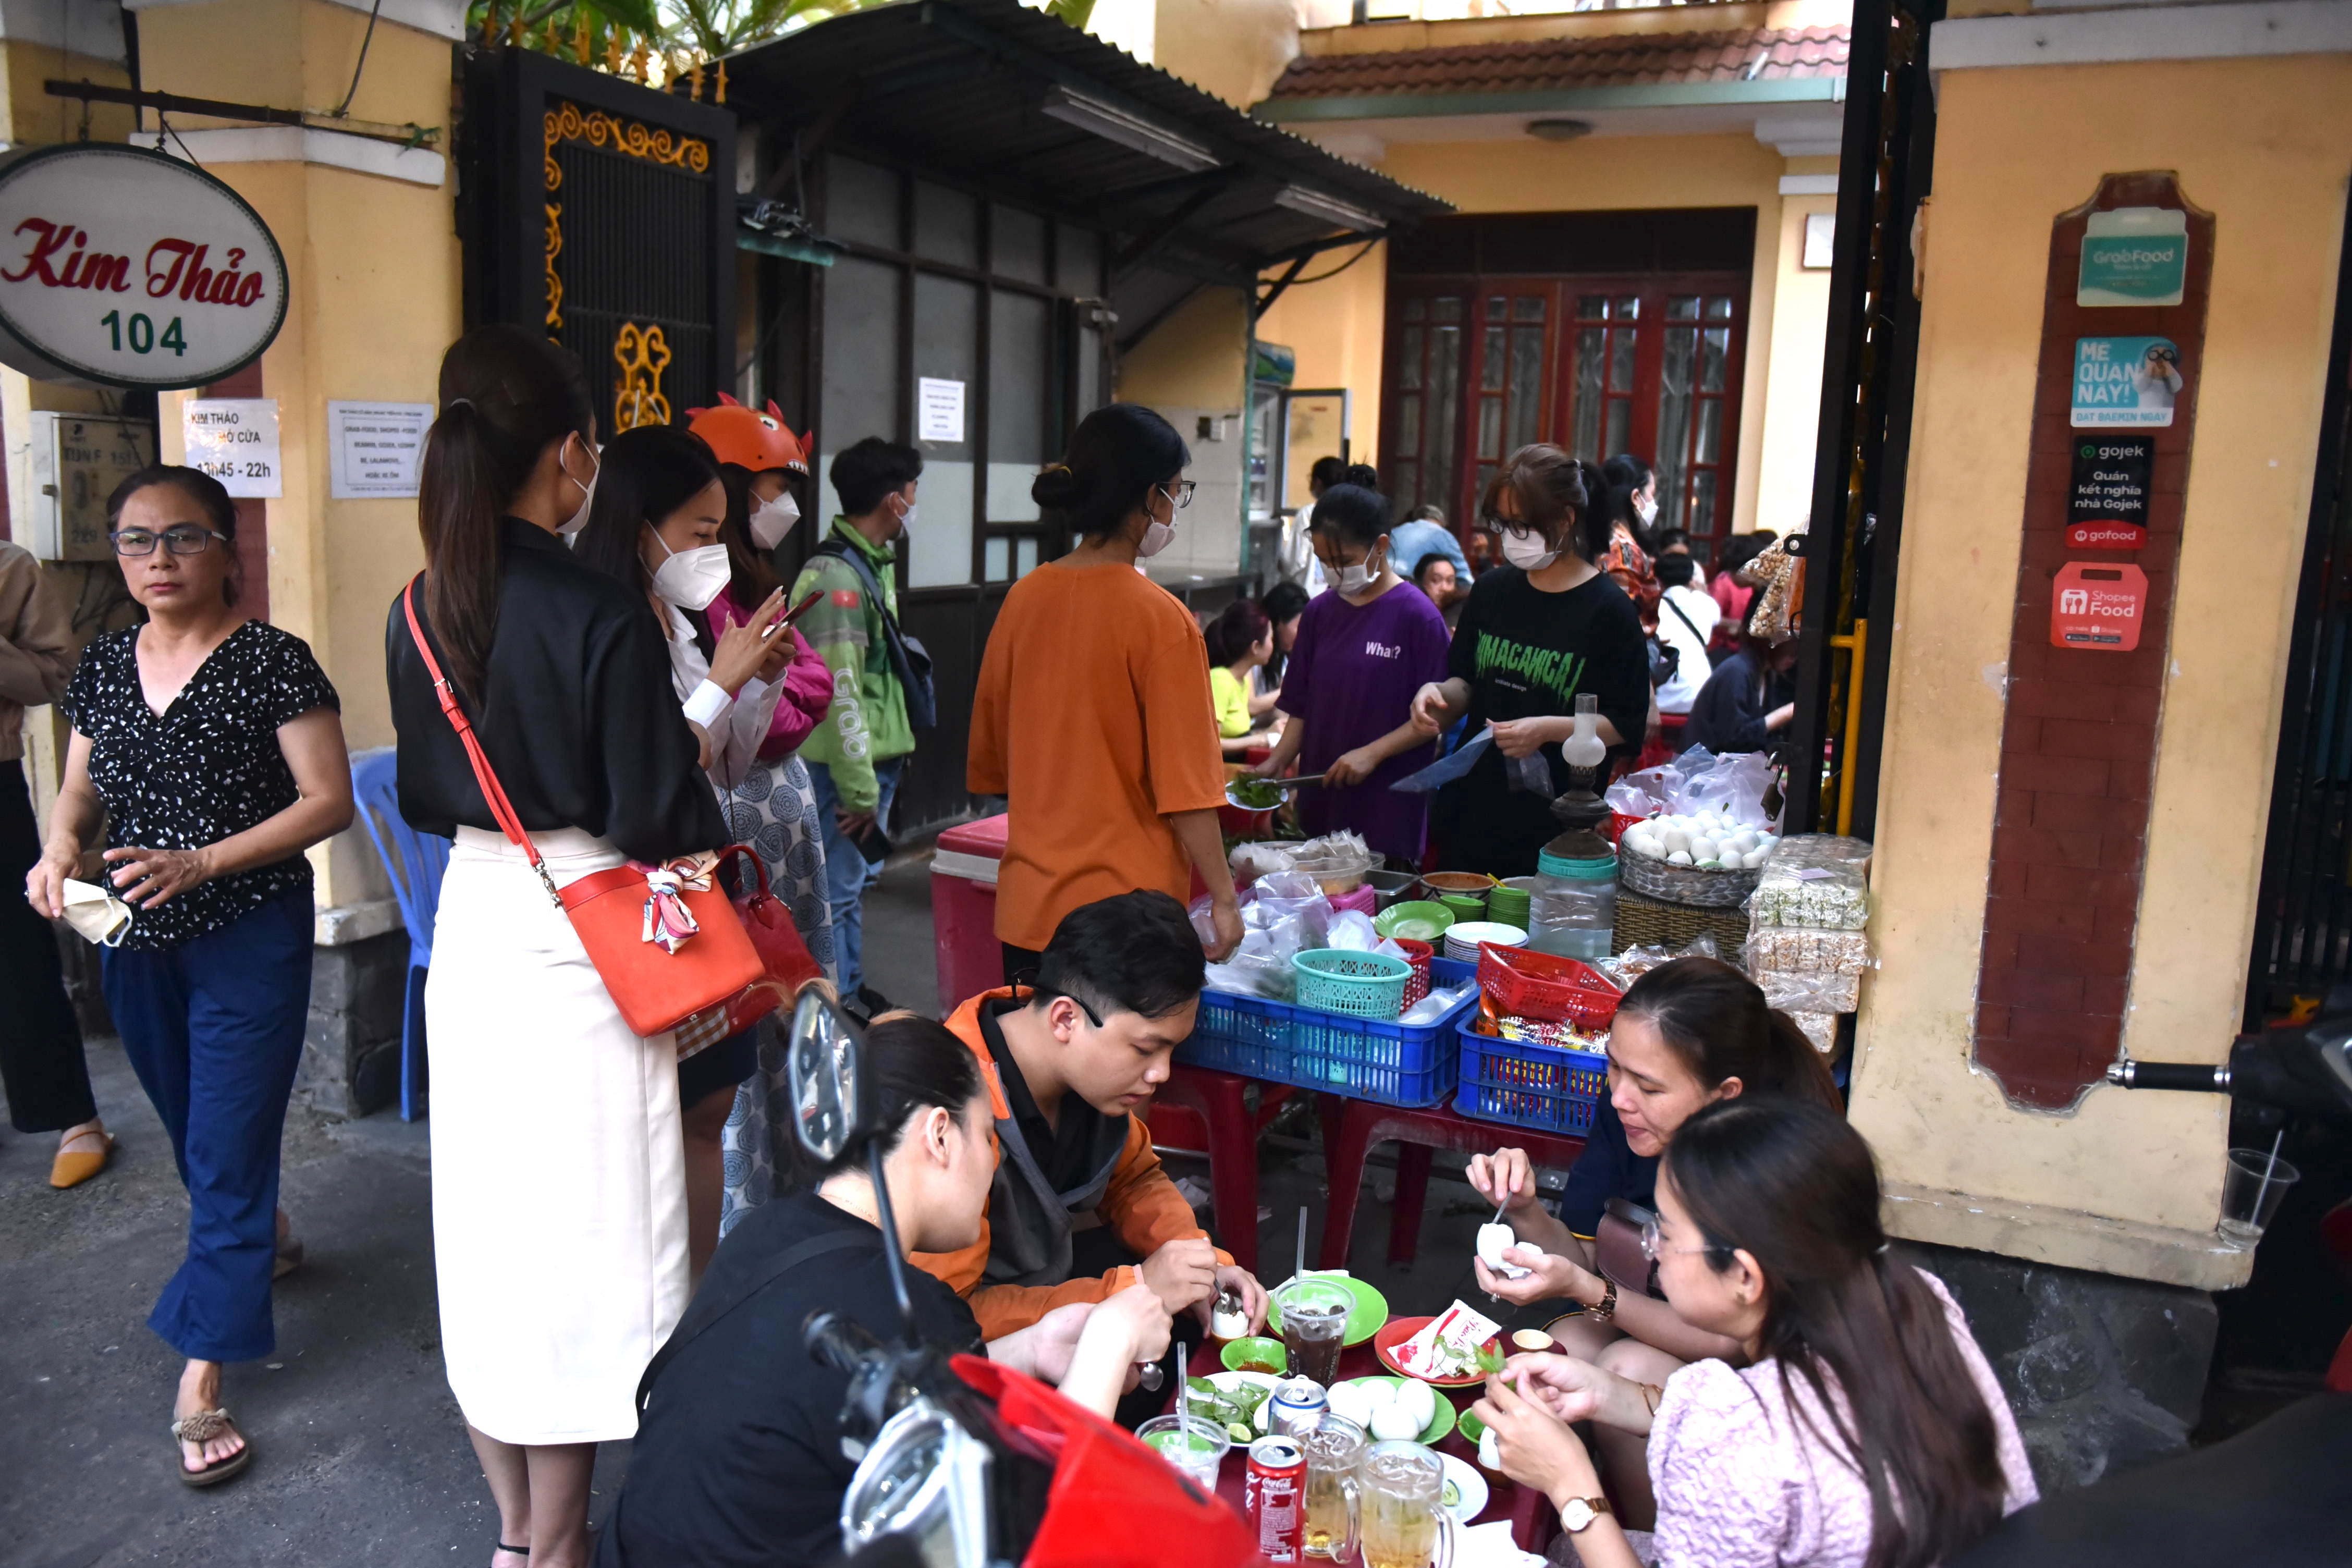 Customers enjoy baluts at Kim Thao stall in Thao Dien Ward, Thu Duc City. Photo: Ngoc Phuong / Tuoi Tre News